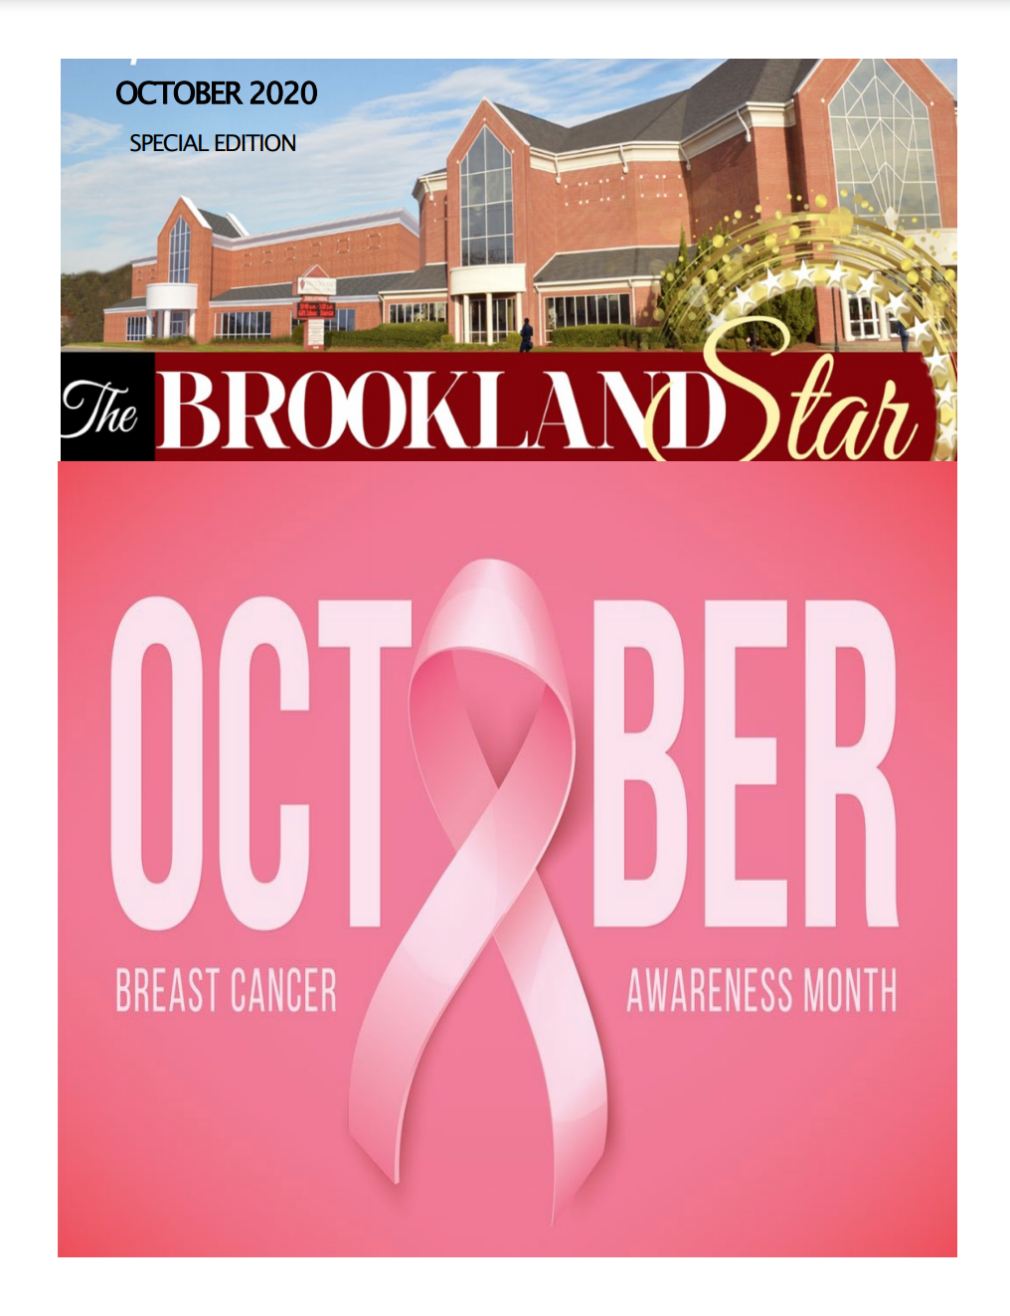 The Brookland Star October 2020 Edition